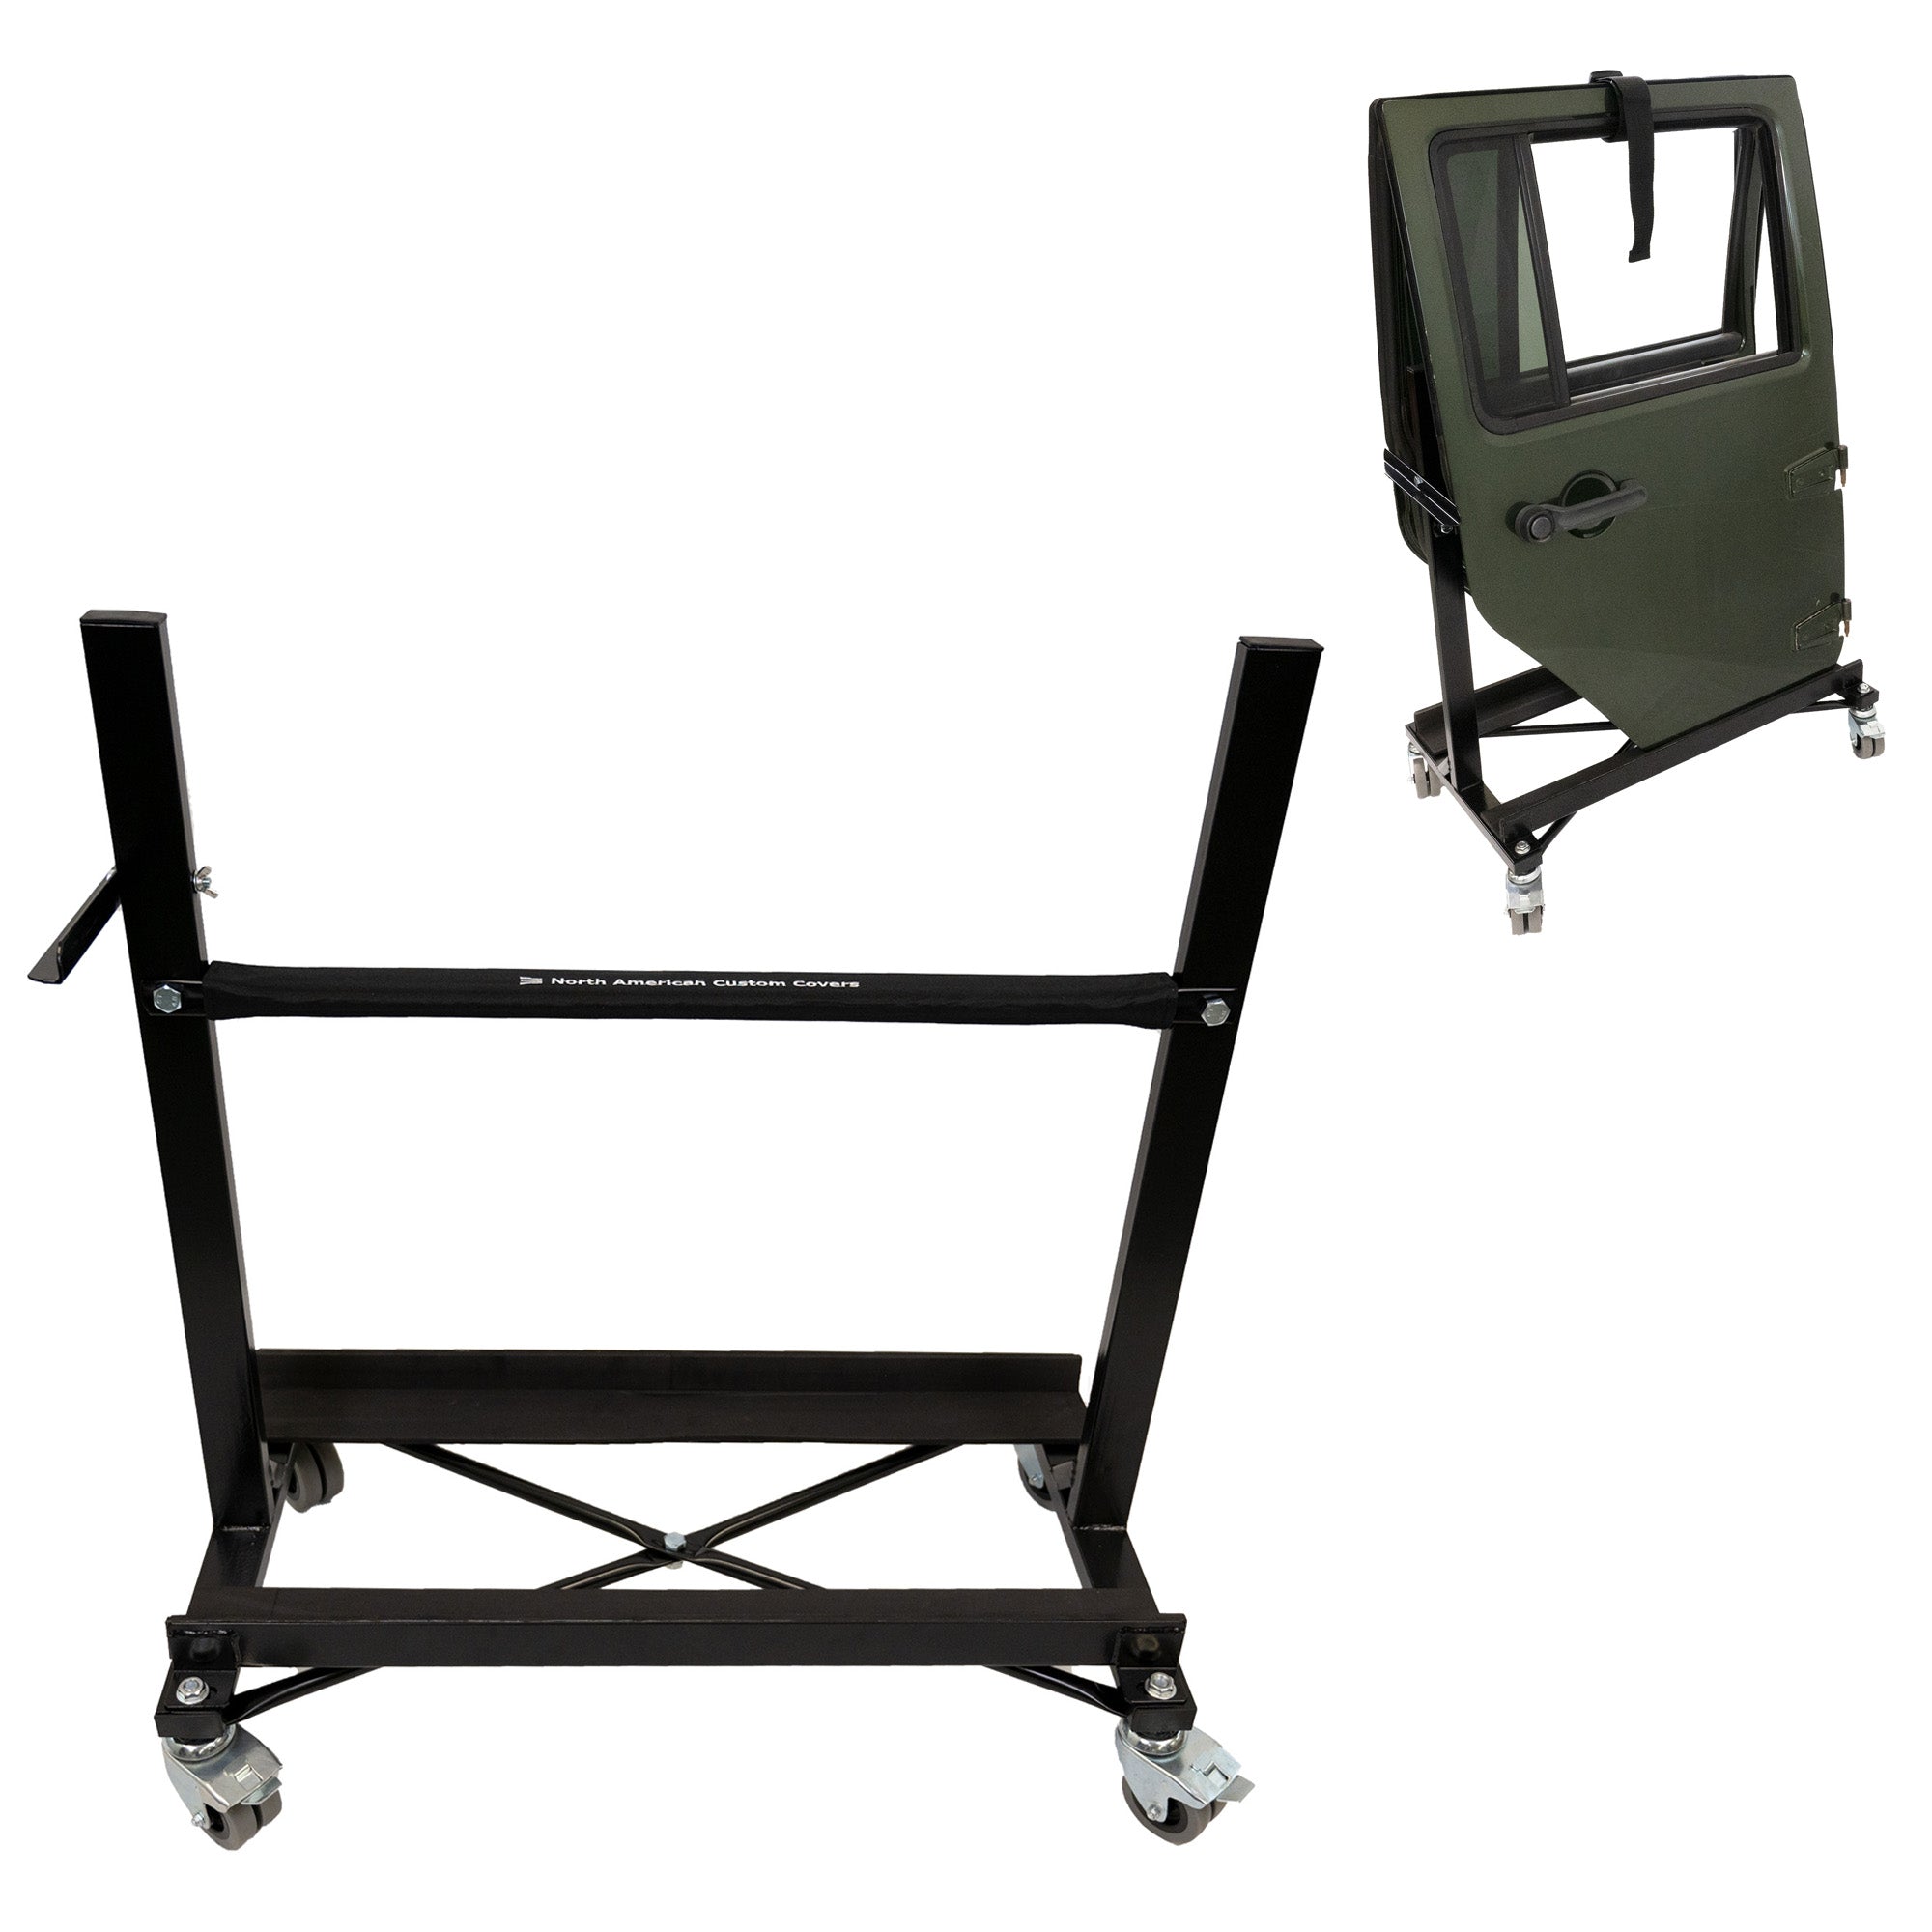 Jeep Wrangler Heavy-duty Door Storage Stand Trolley Cart Rack (Black) with Securing Strap (1503)